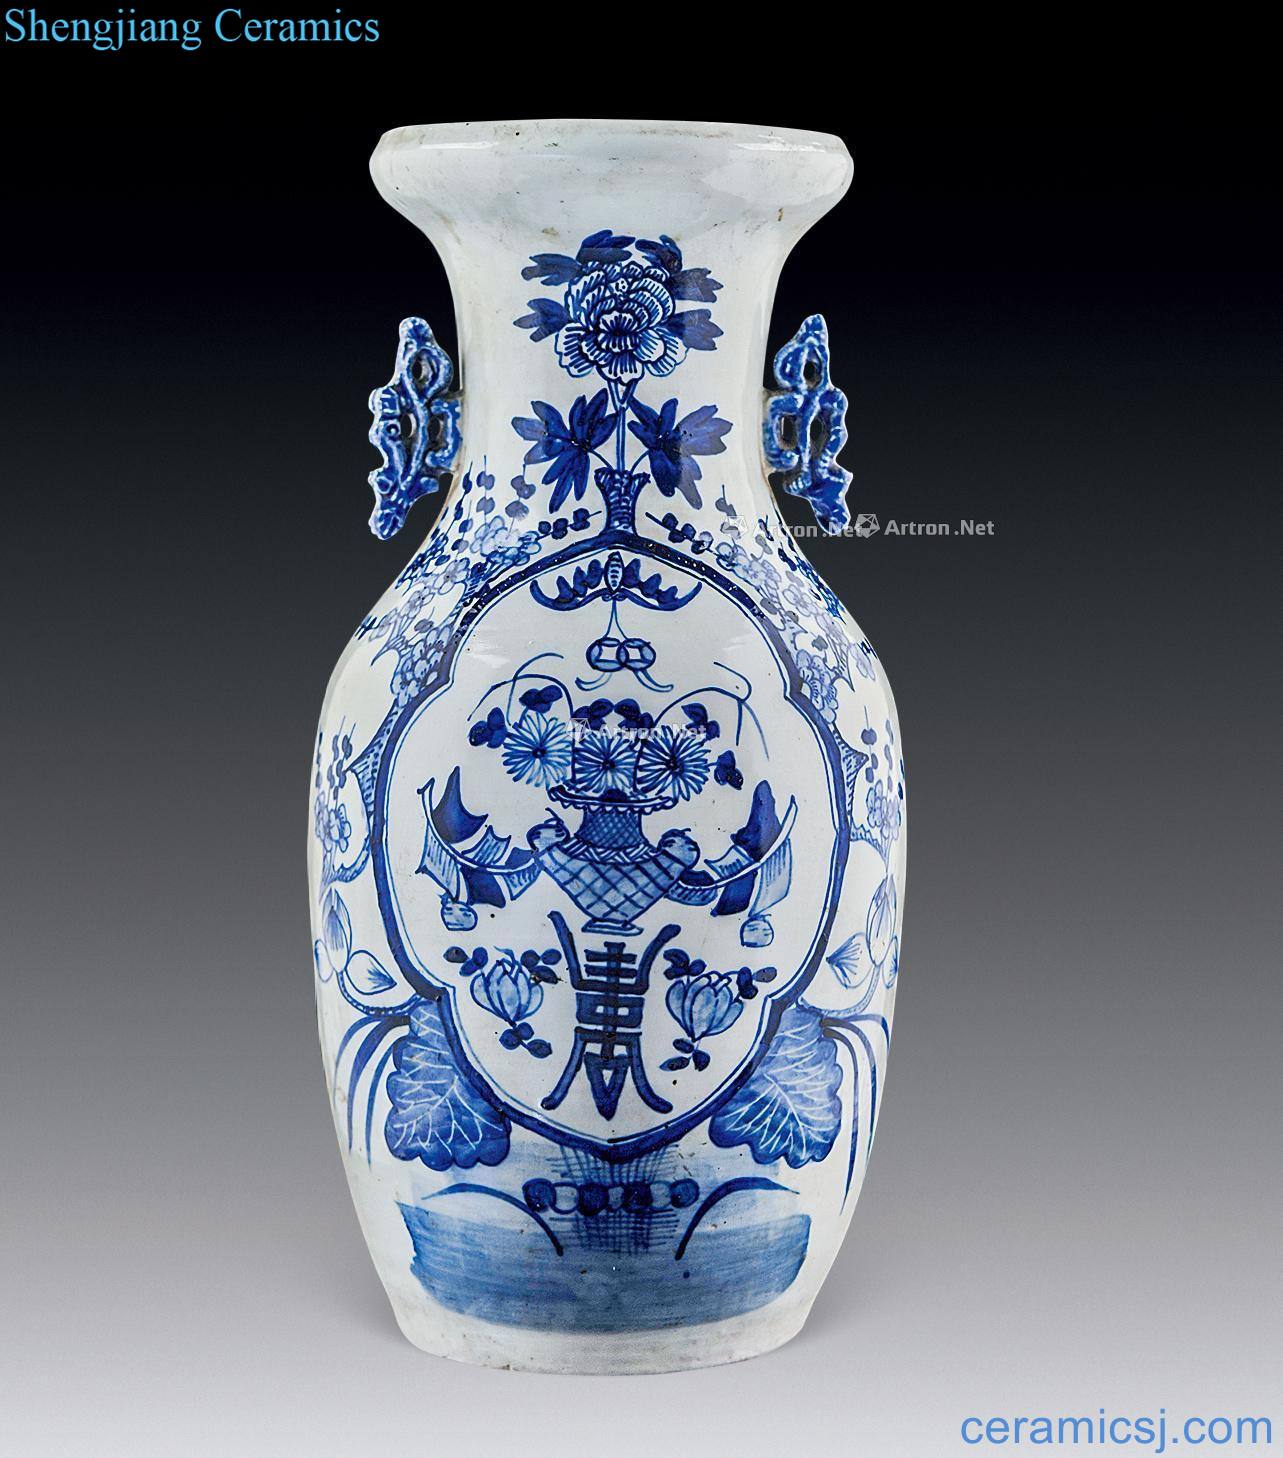 In the qing dynasty Blue and white vase with a floral print therefore